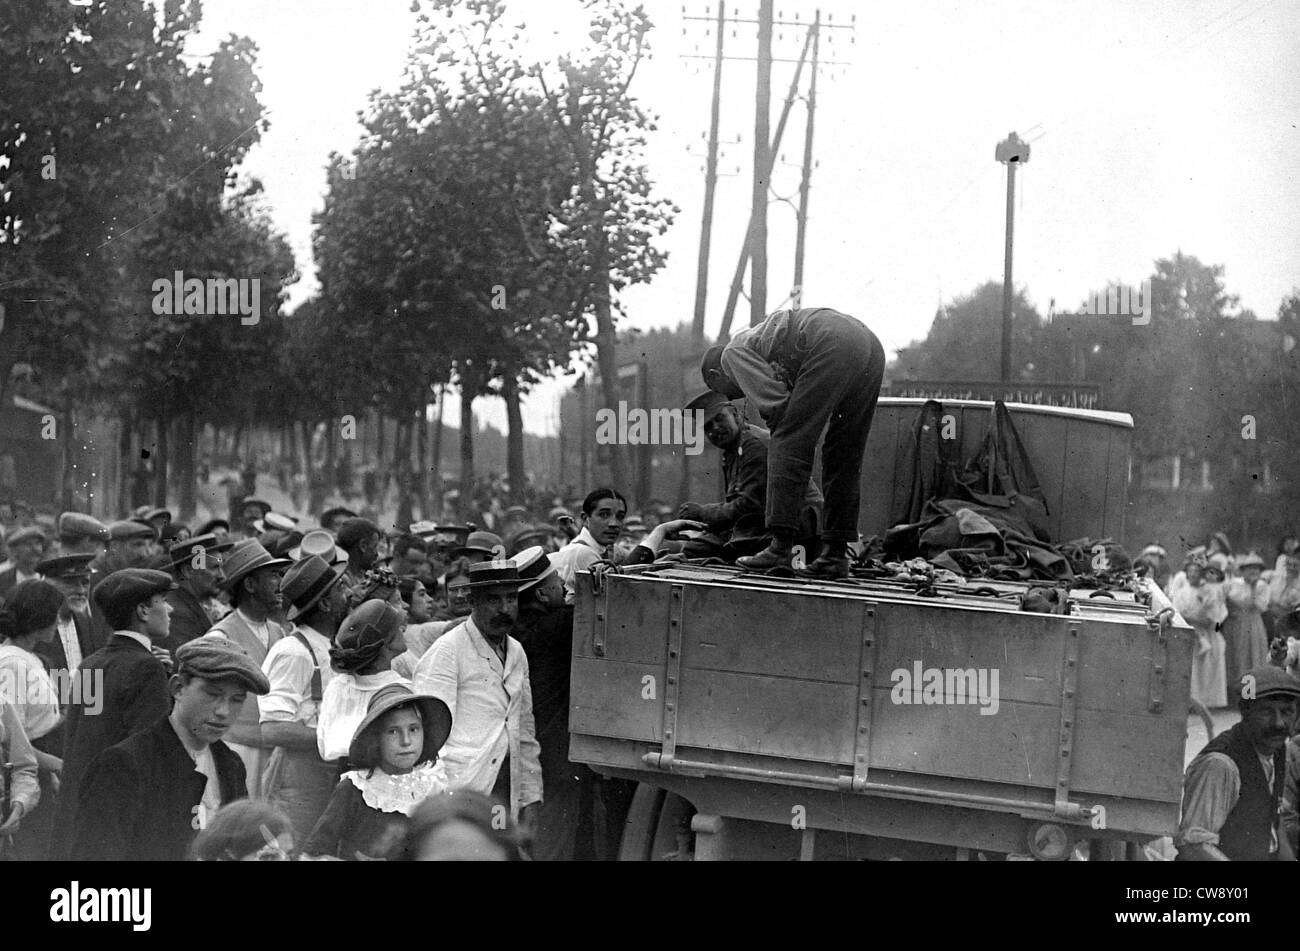 A crowd around an English truck Stock Photo